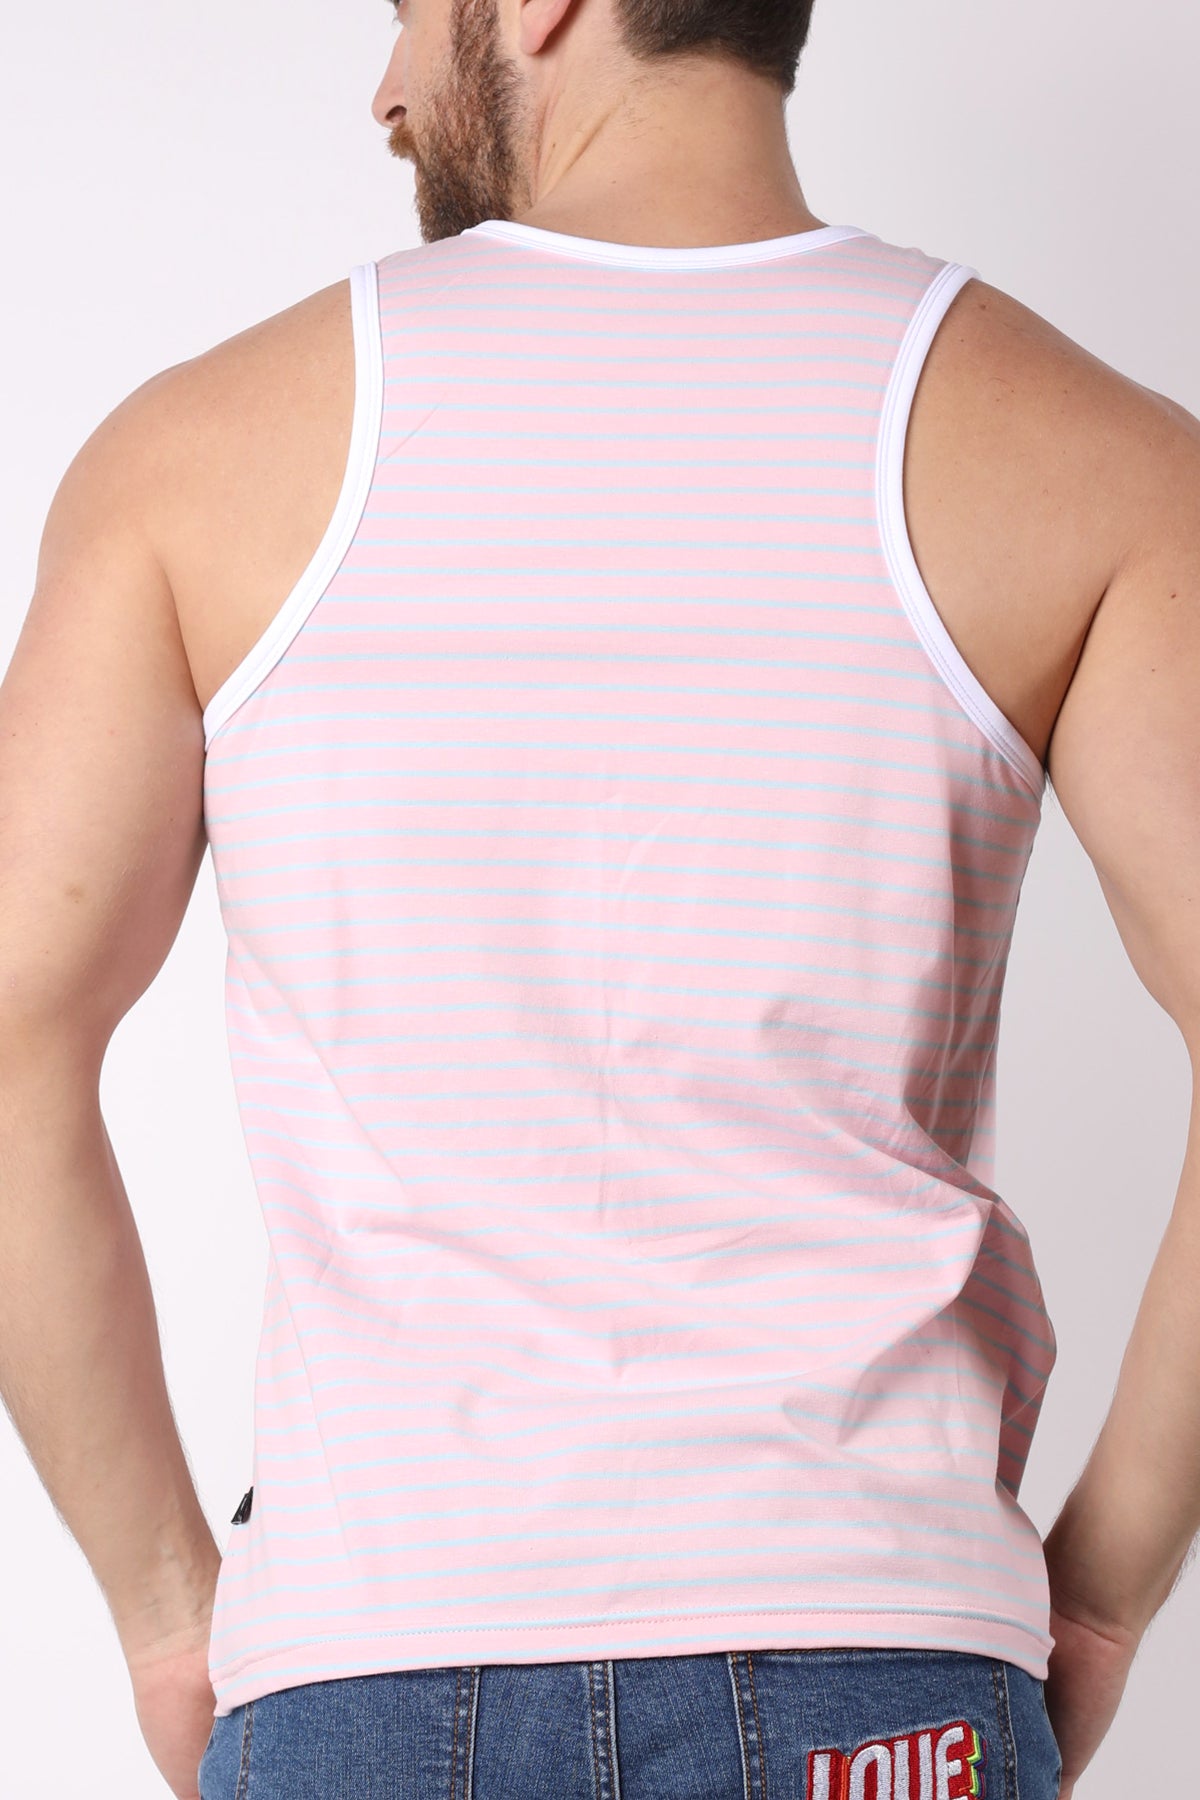 Coral Sands Striped Tank Top